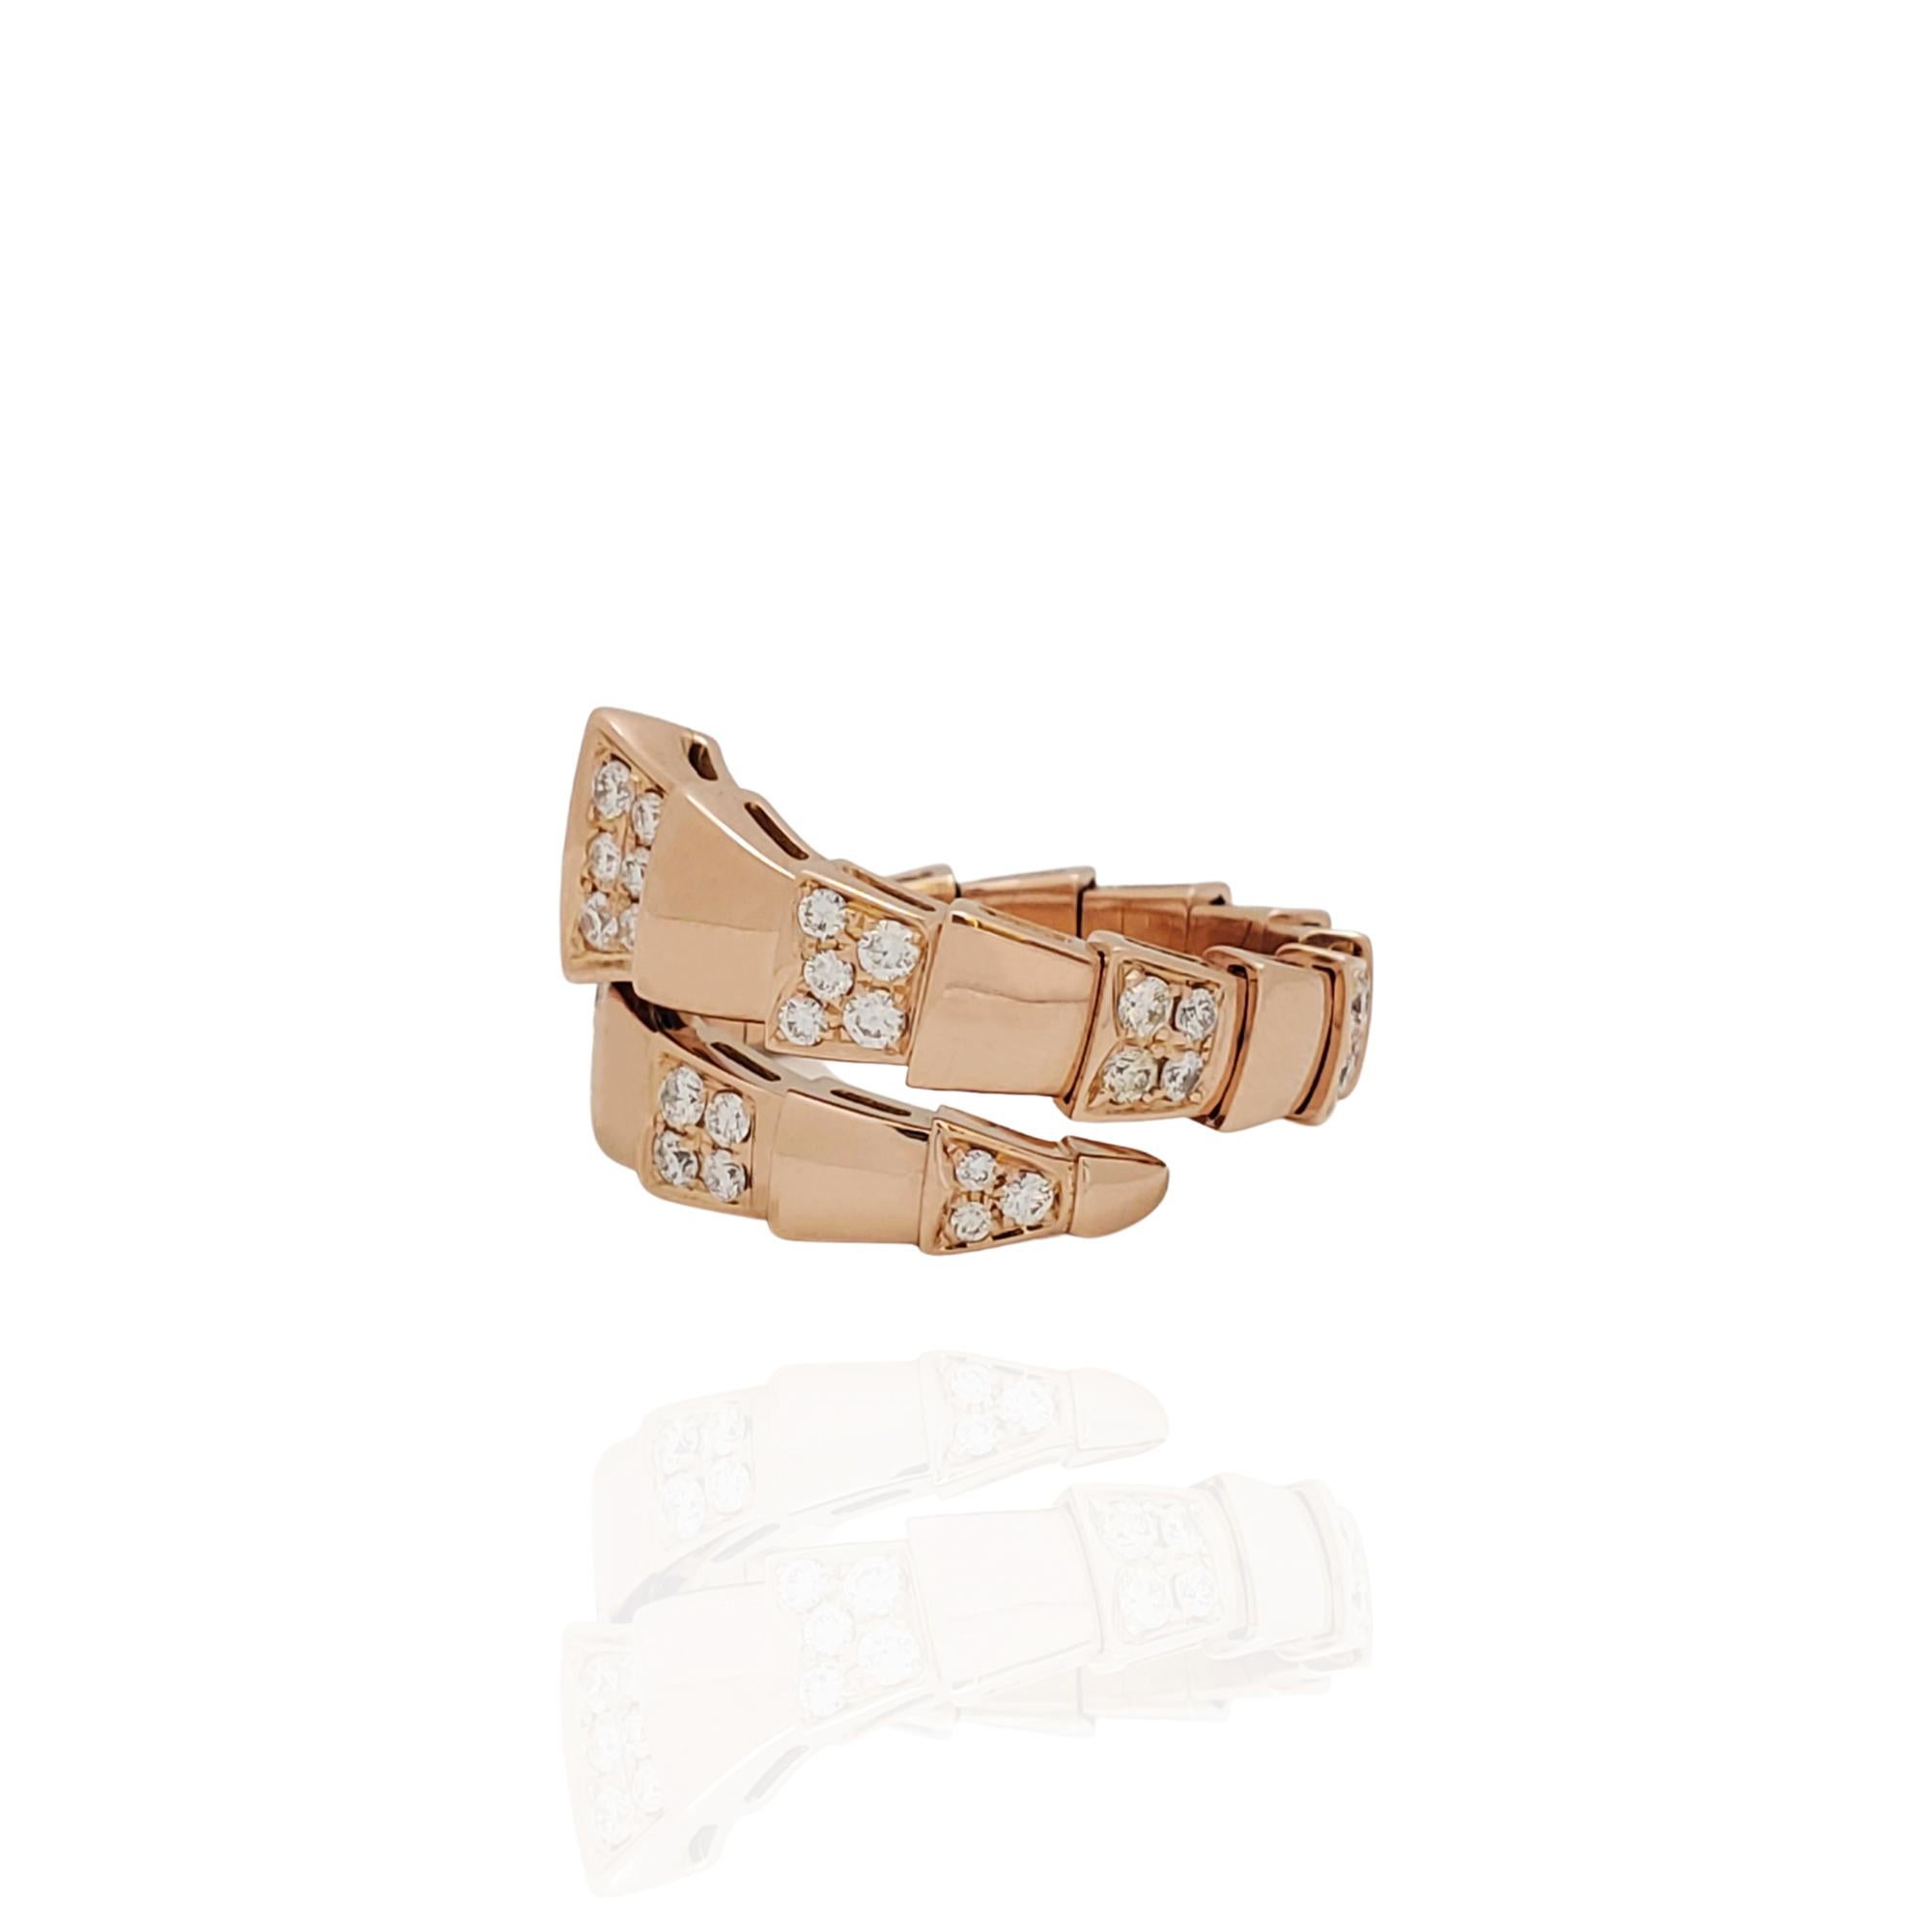 Authentic Bvlgari Serpenti Viper ring crafted in 18-karat rose gold. The serpentine design coils around the finger and features pavé set diamonds of an estimated 1.1 total carats on the head and alternating scales.  Size 59, US 8 3/4.  Signed